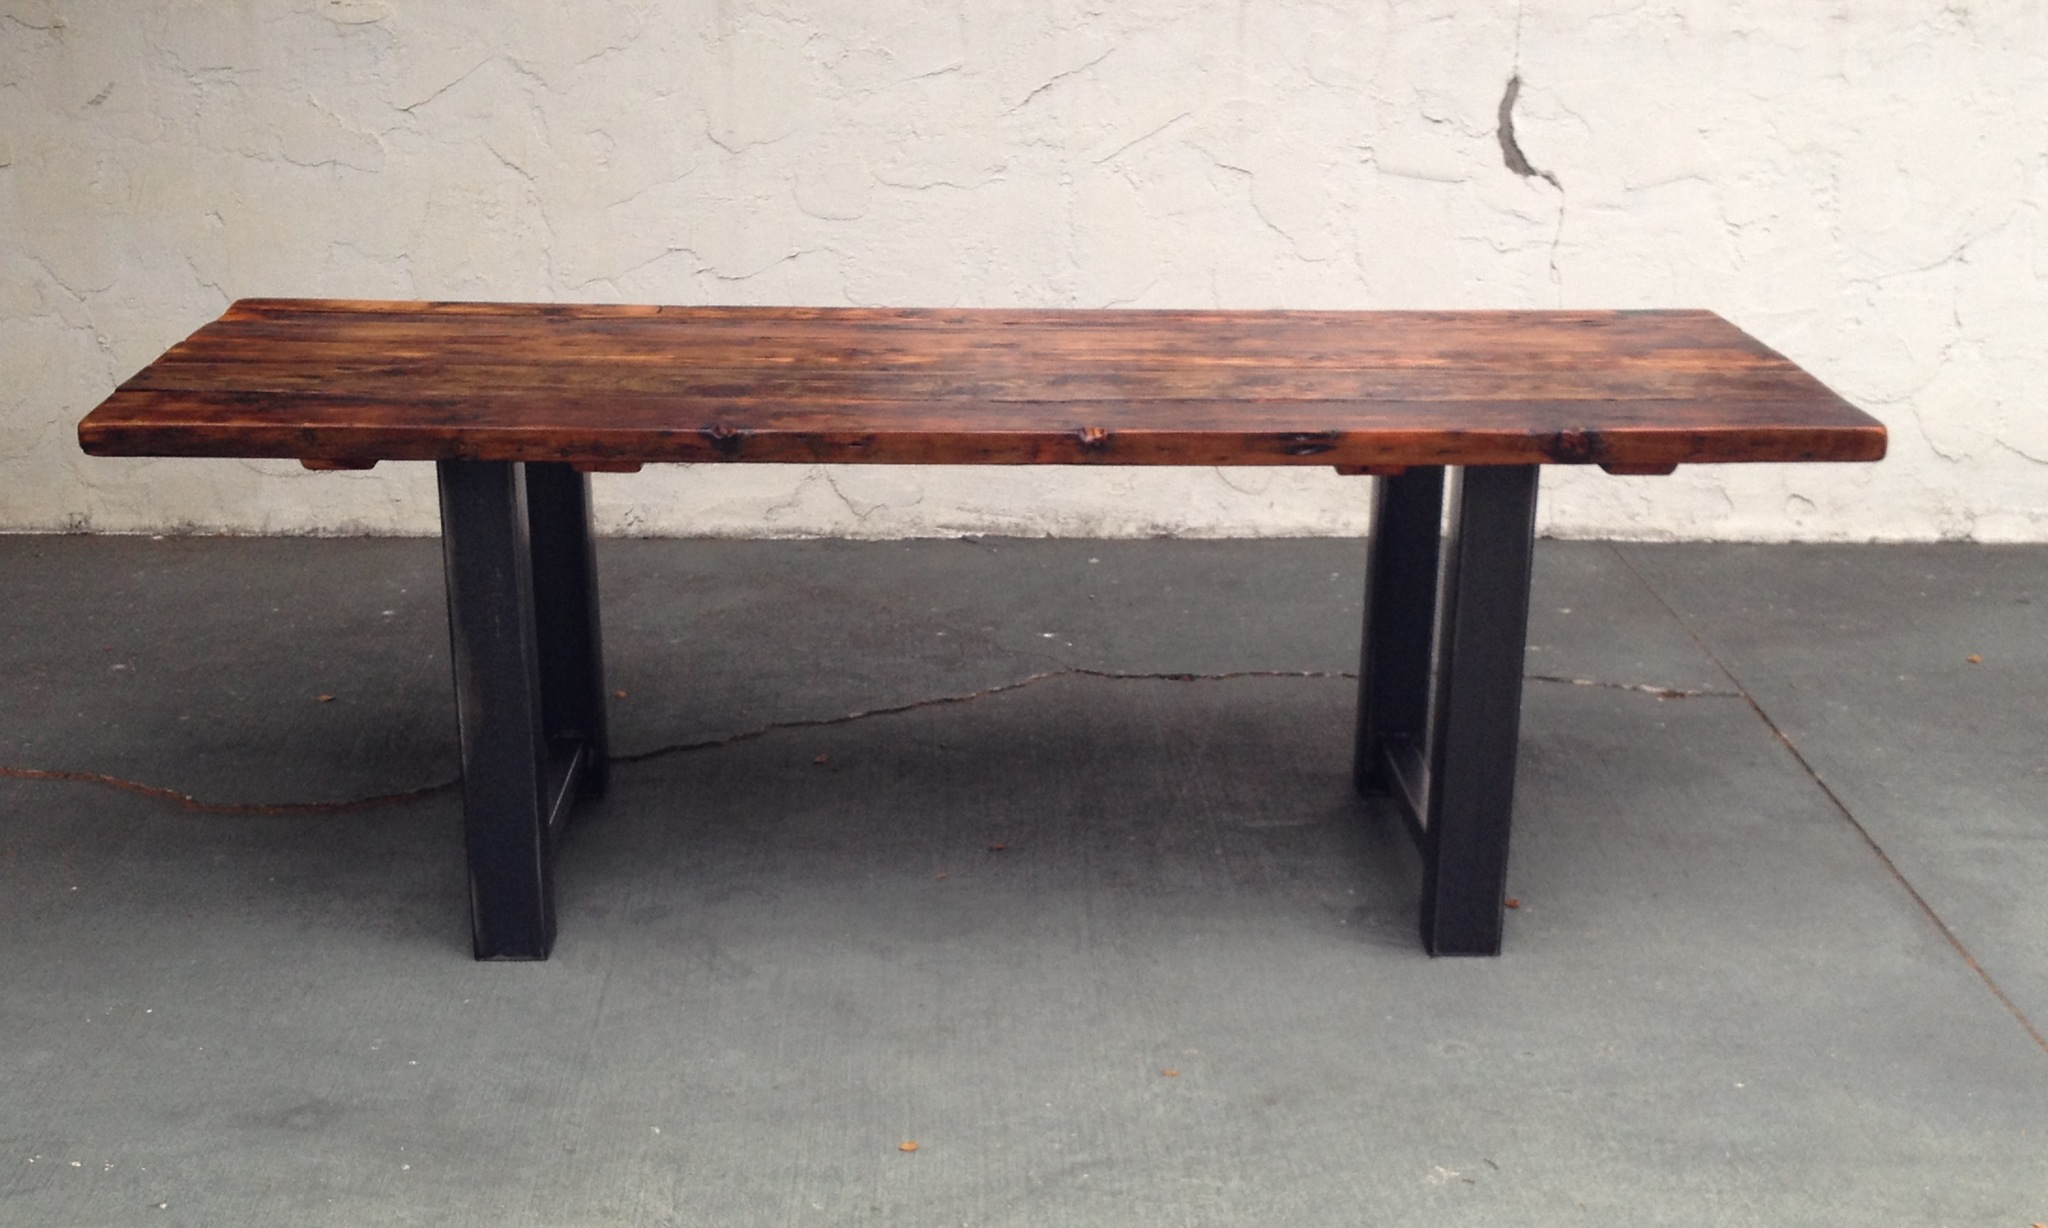 Reclaimed Wood and Steel Dining Table | thecoastalcraftsman